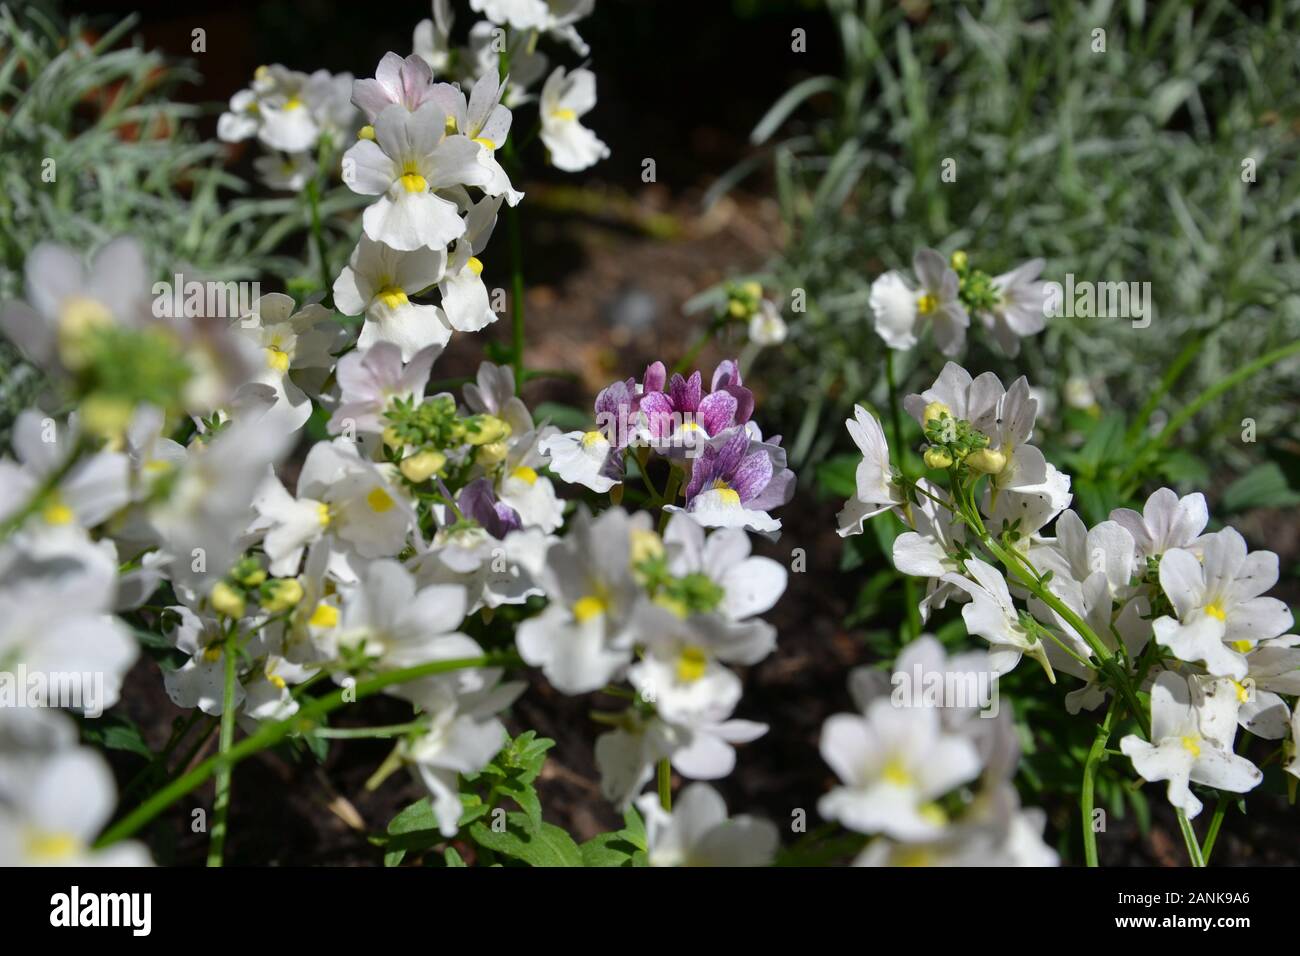 Very pretty small white, pink and purple flowers with yellow centres. A flowerbed planted with the heavily scented bedding plant nemesia (aloha). Gorg Stock Photo